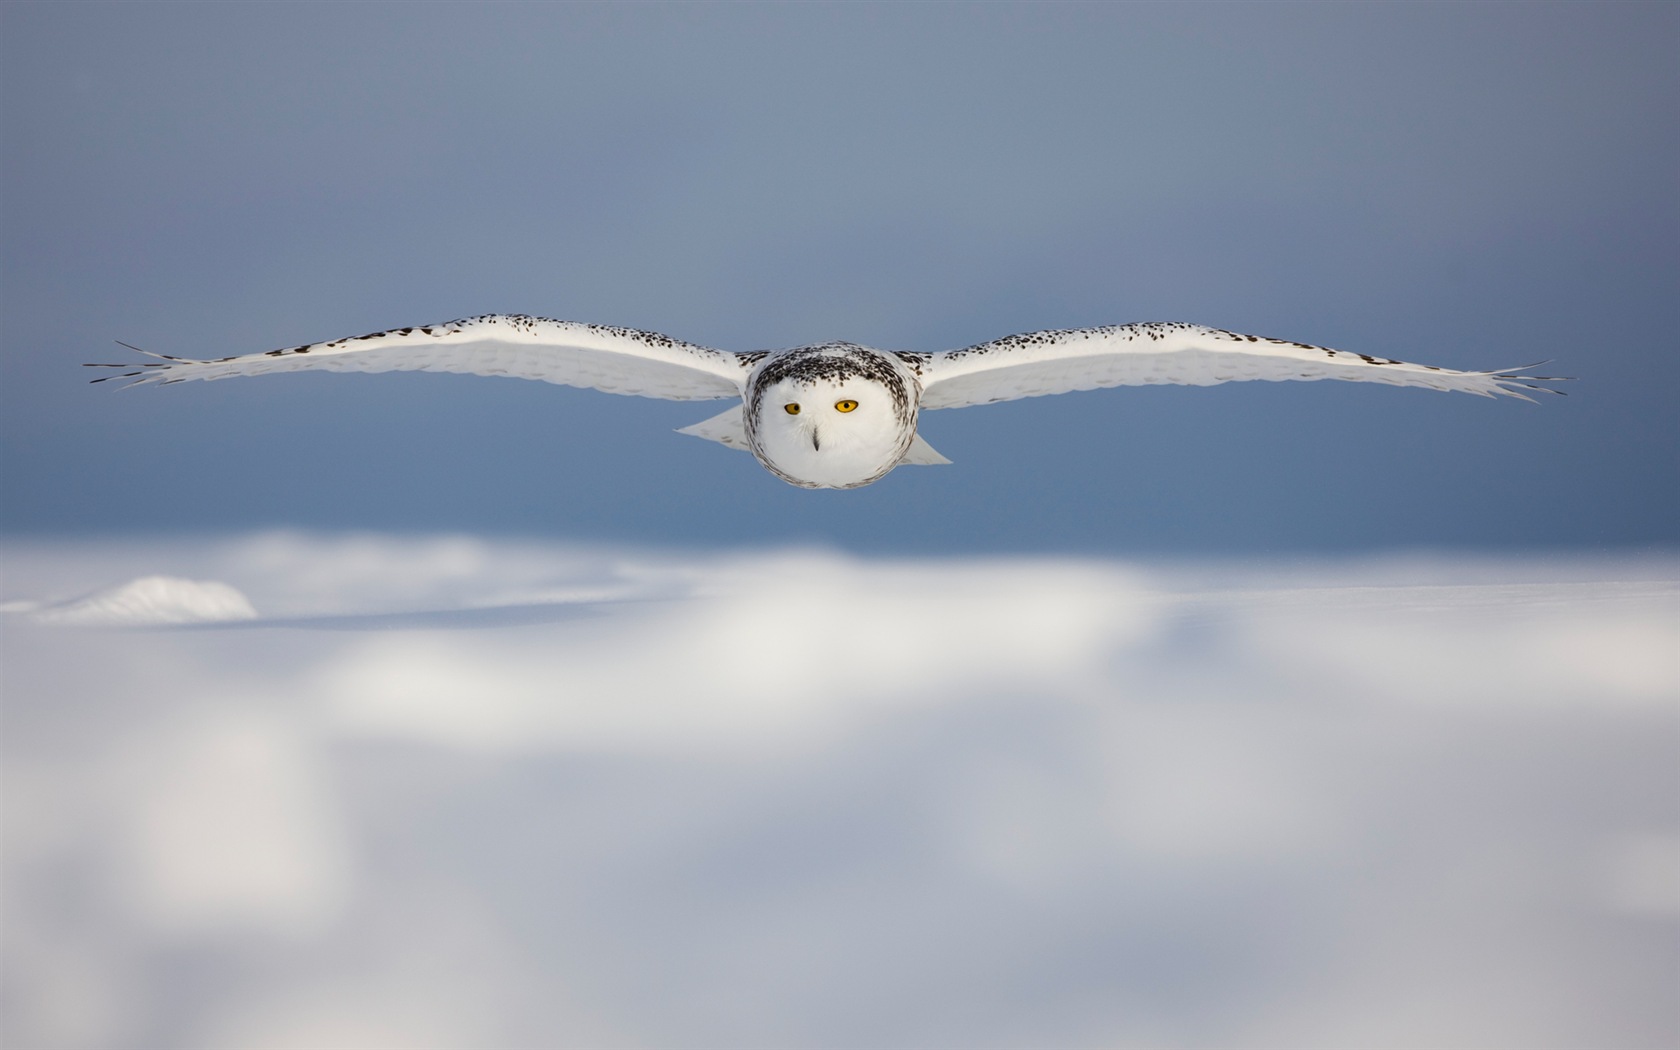 Windows 8 Wallpapers: Arctic, the nature ecological landscape, arctic animals #12 - 1680x1050